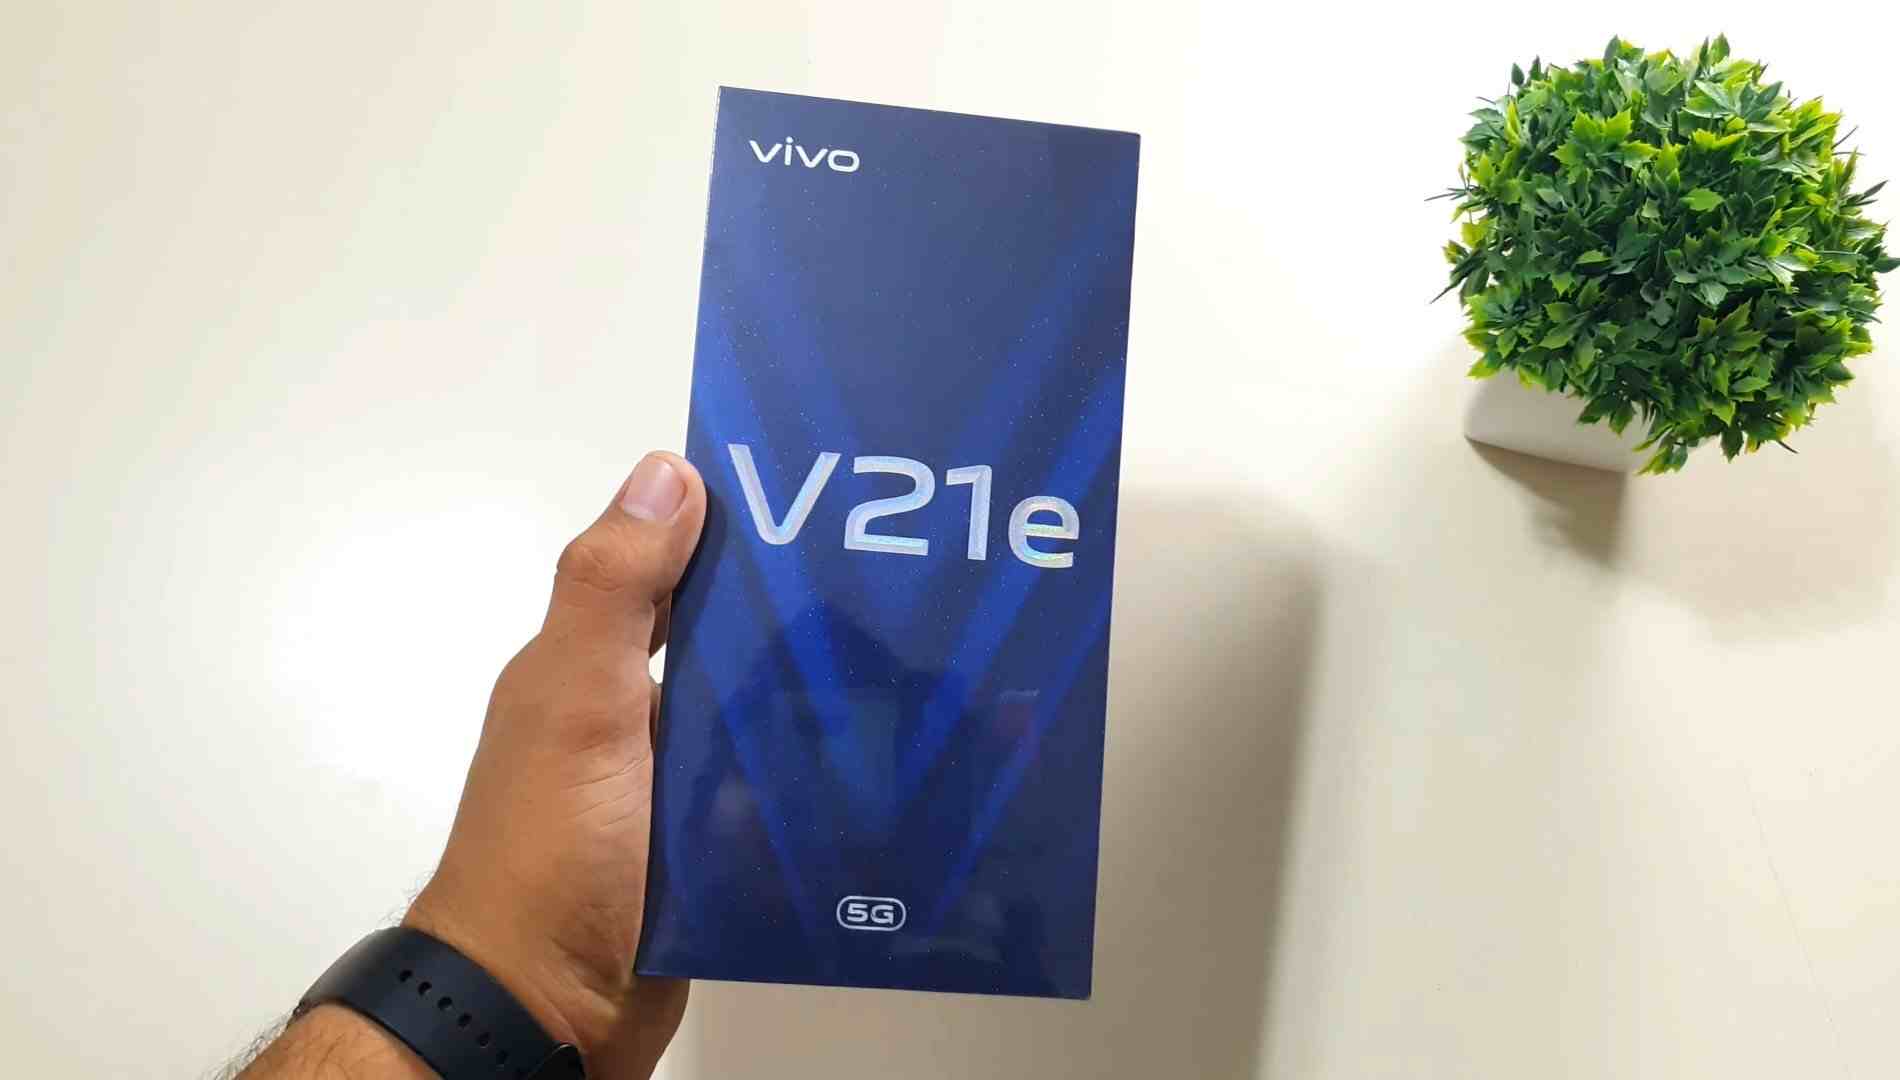 Vivo V21e 5g unboxing video leaked detailed specifications and price